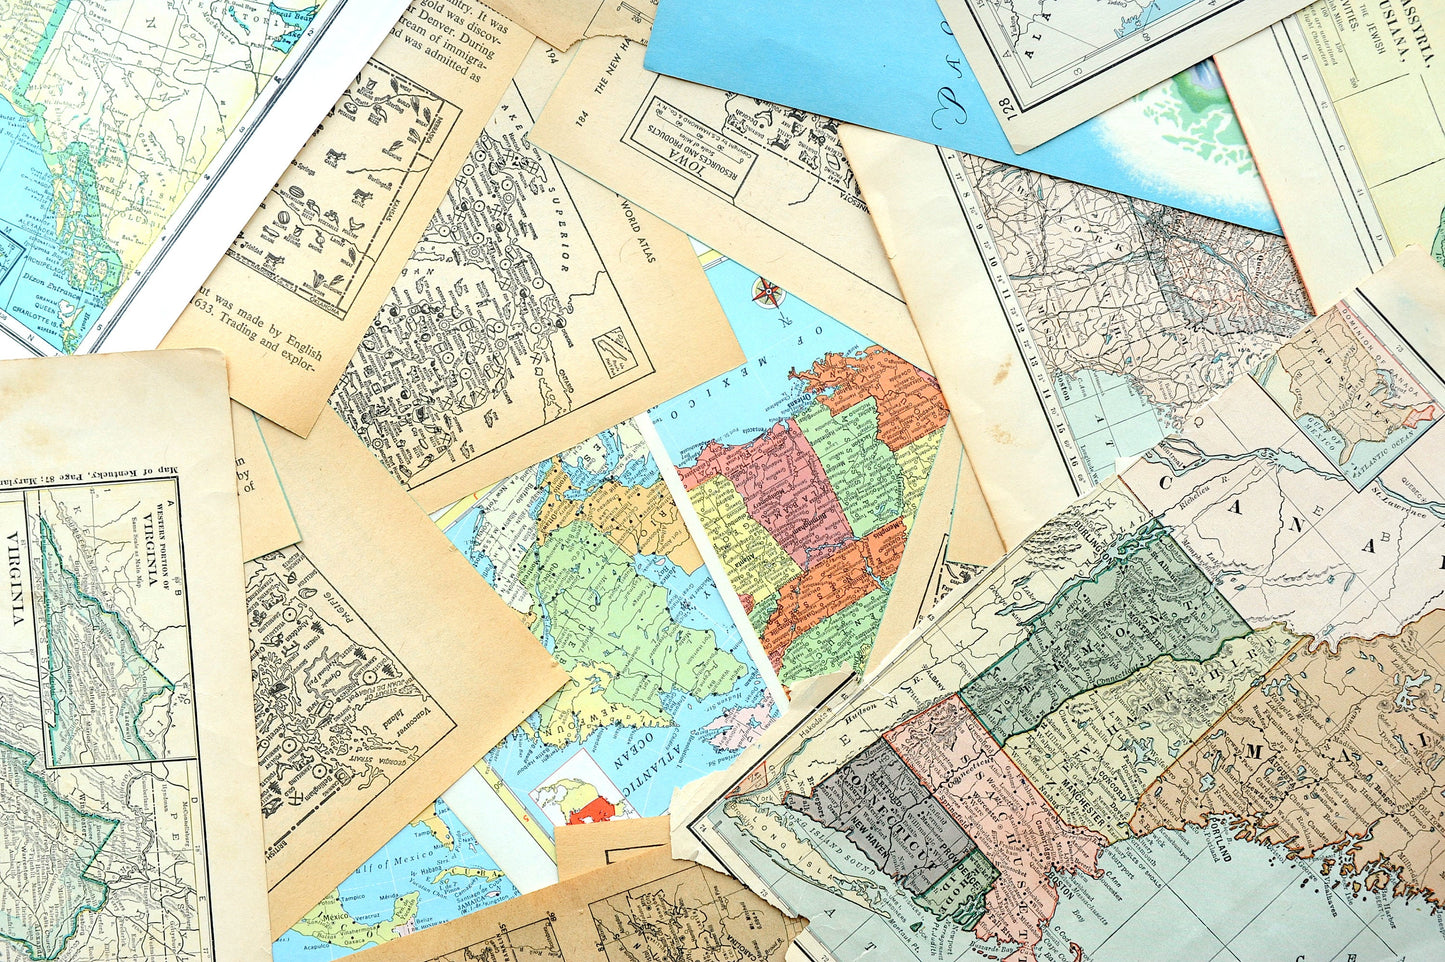 Papers for repurposing: map & atlas pages